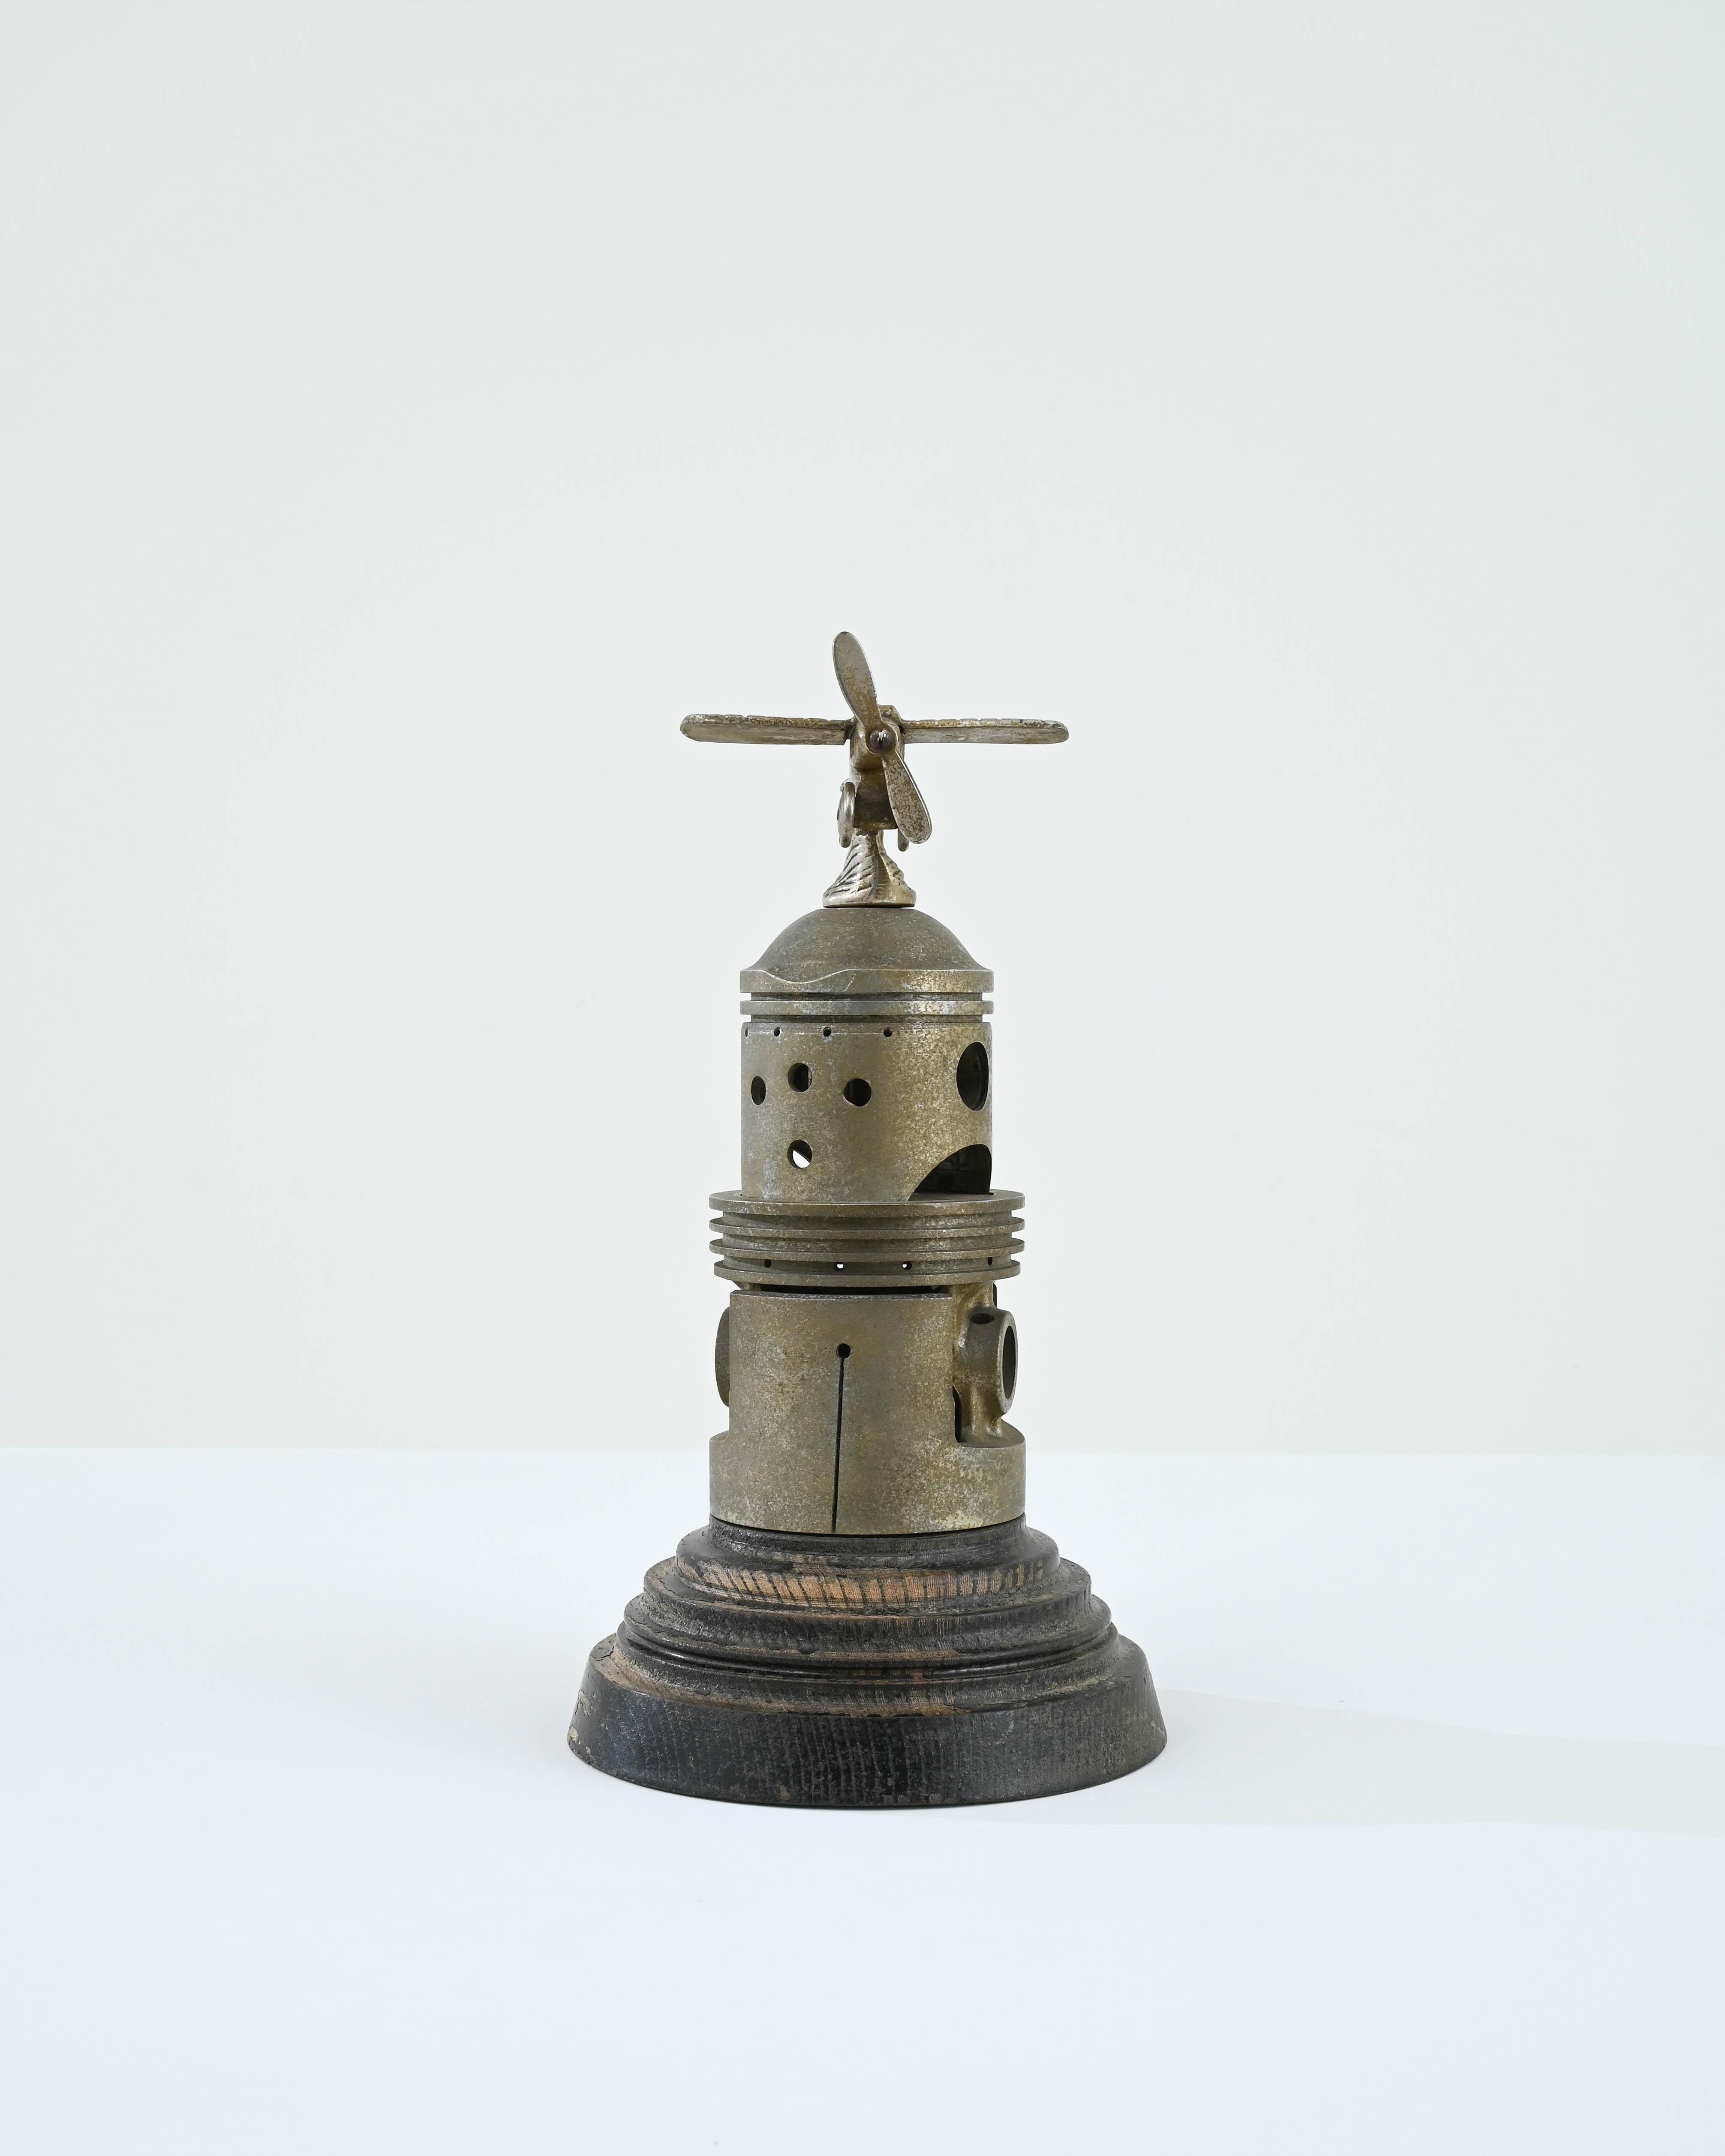 A metal decoration created in 20th century Belgium. A propellered plane rests above a unique structure, seemingly created from repurposed engineering parts, resembling a futuristic tower. With richly patinated alloyed metal resting upon a round,